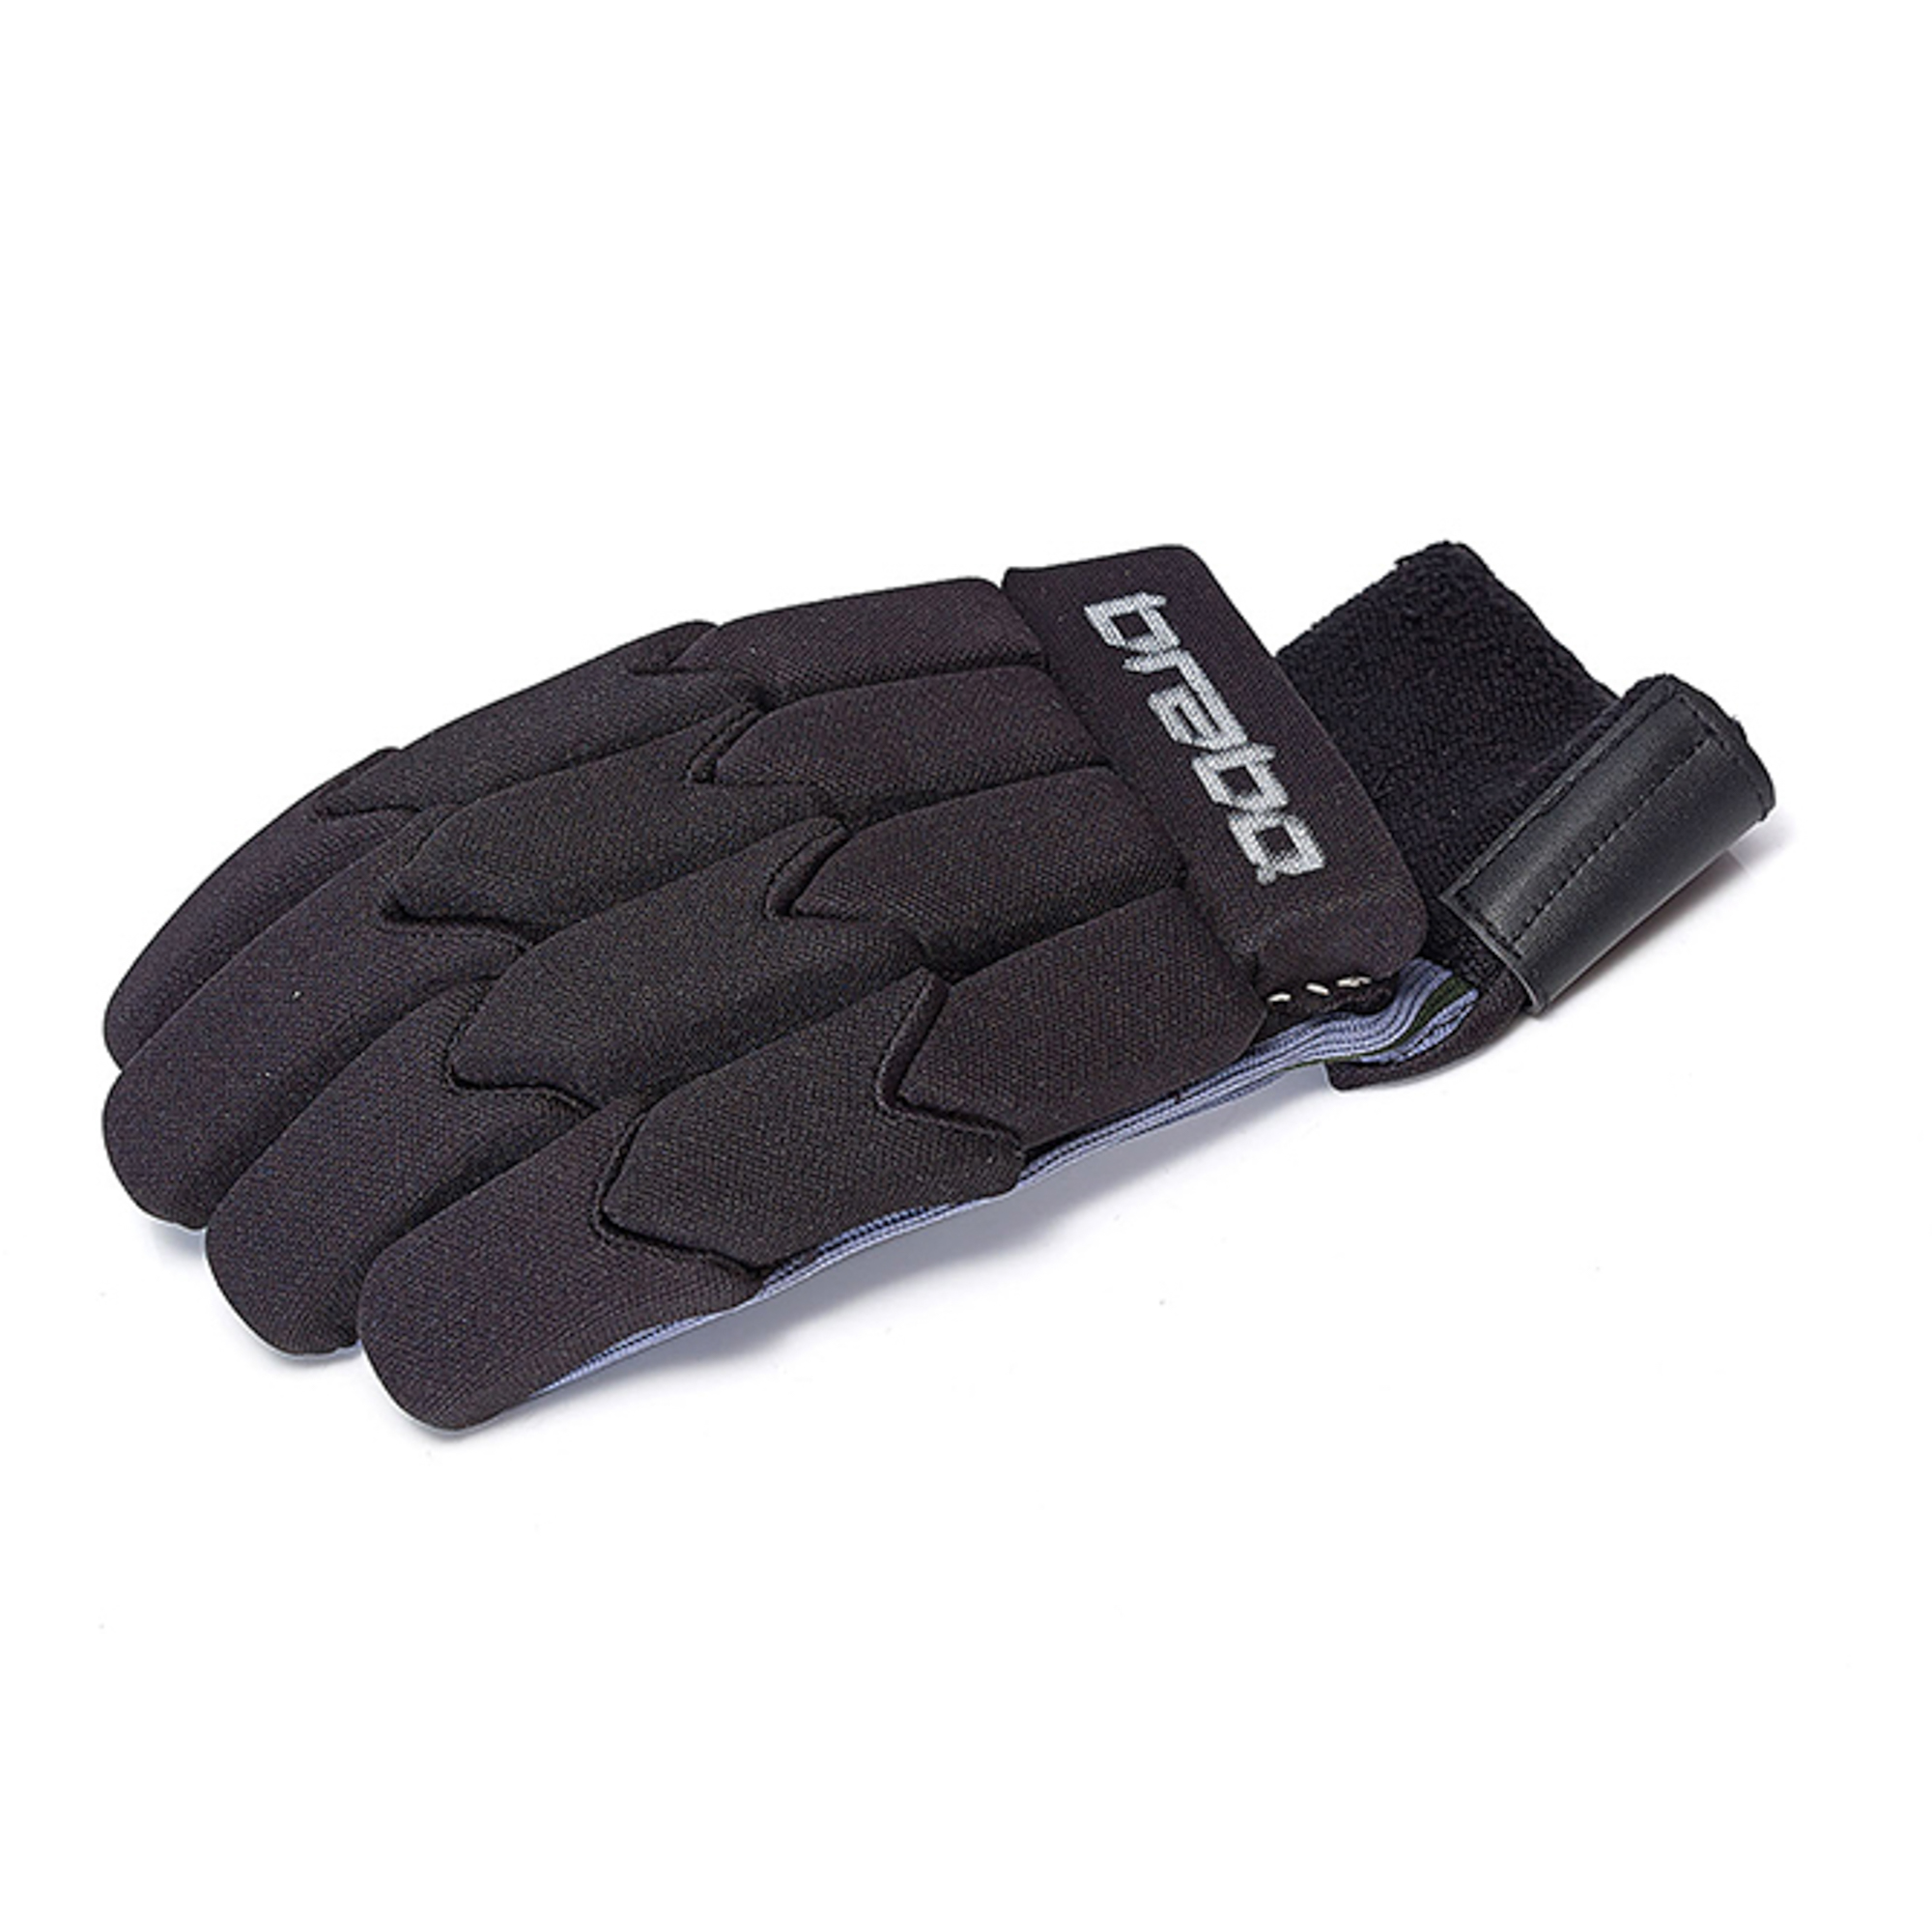 Indoor Player Glove F1.1 Right Hand